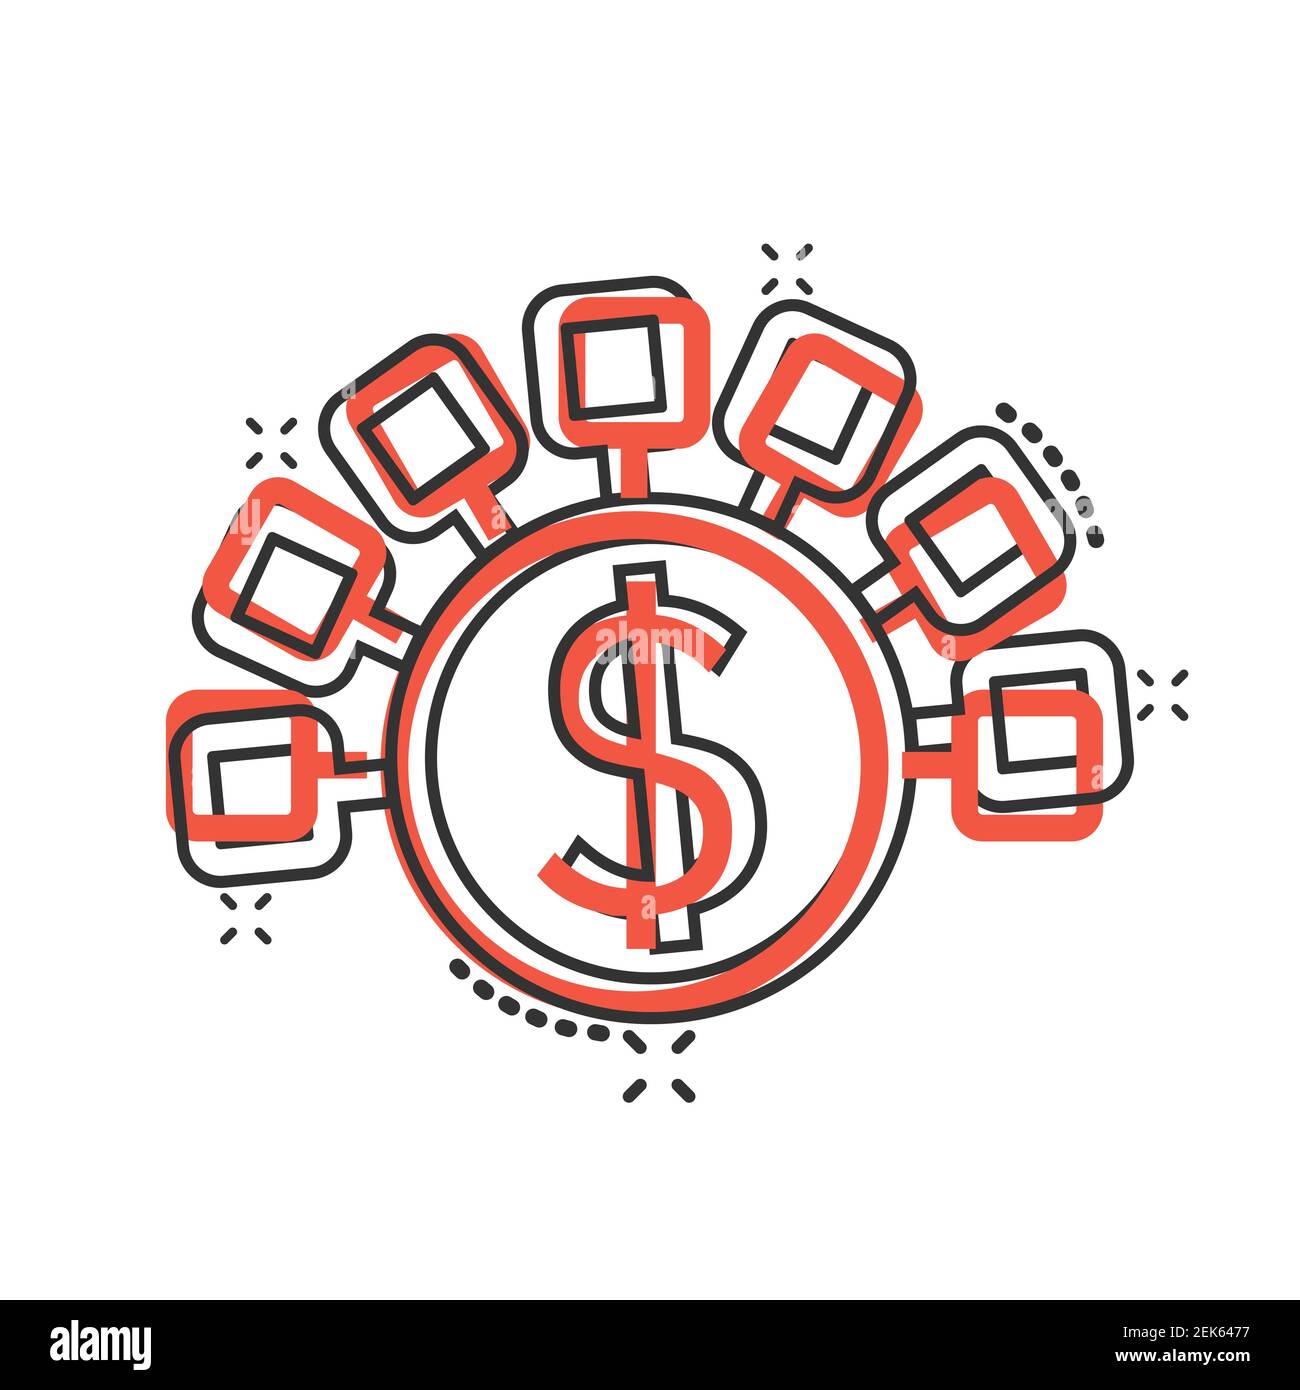 Money revenue icon in comic style. Dollar coin cartoon vector illustration on white isolated background. Finance structure splash effect business conc Stock Vector